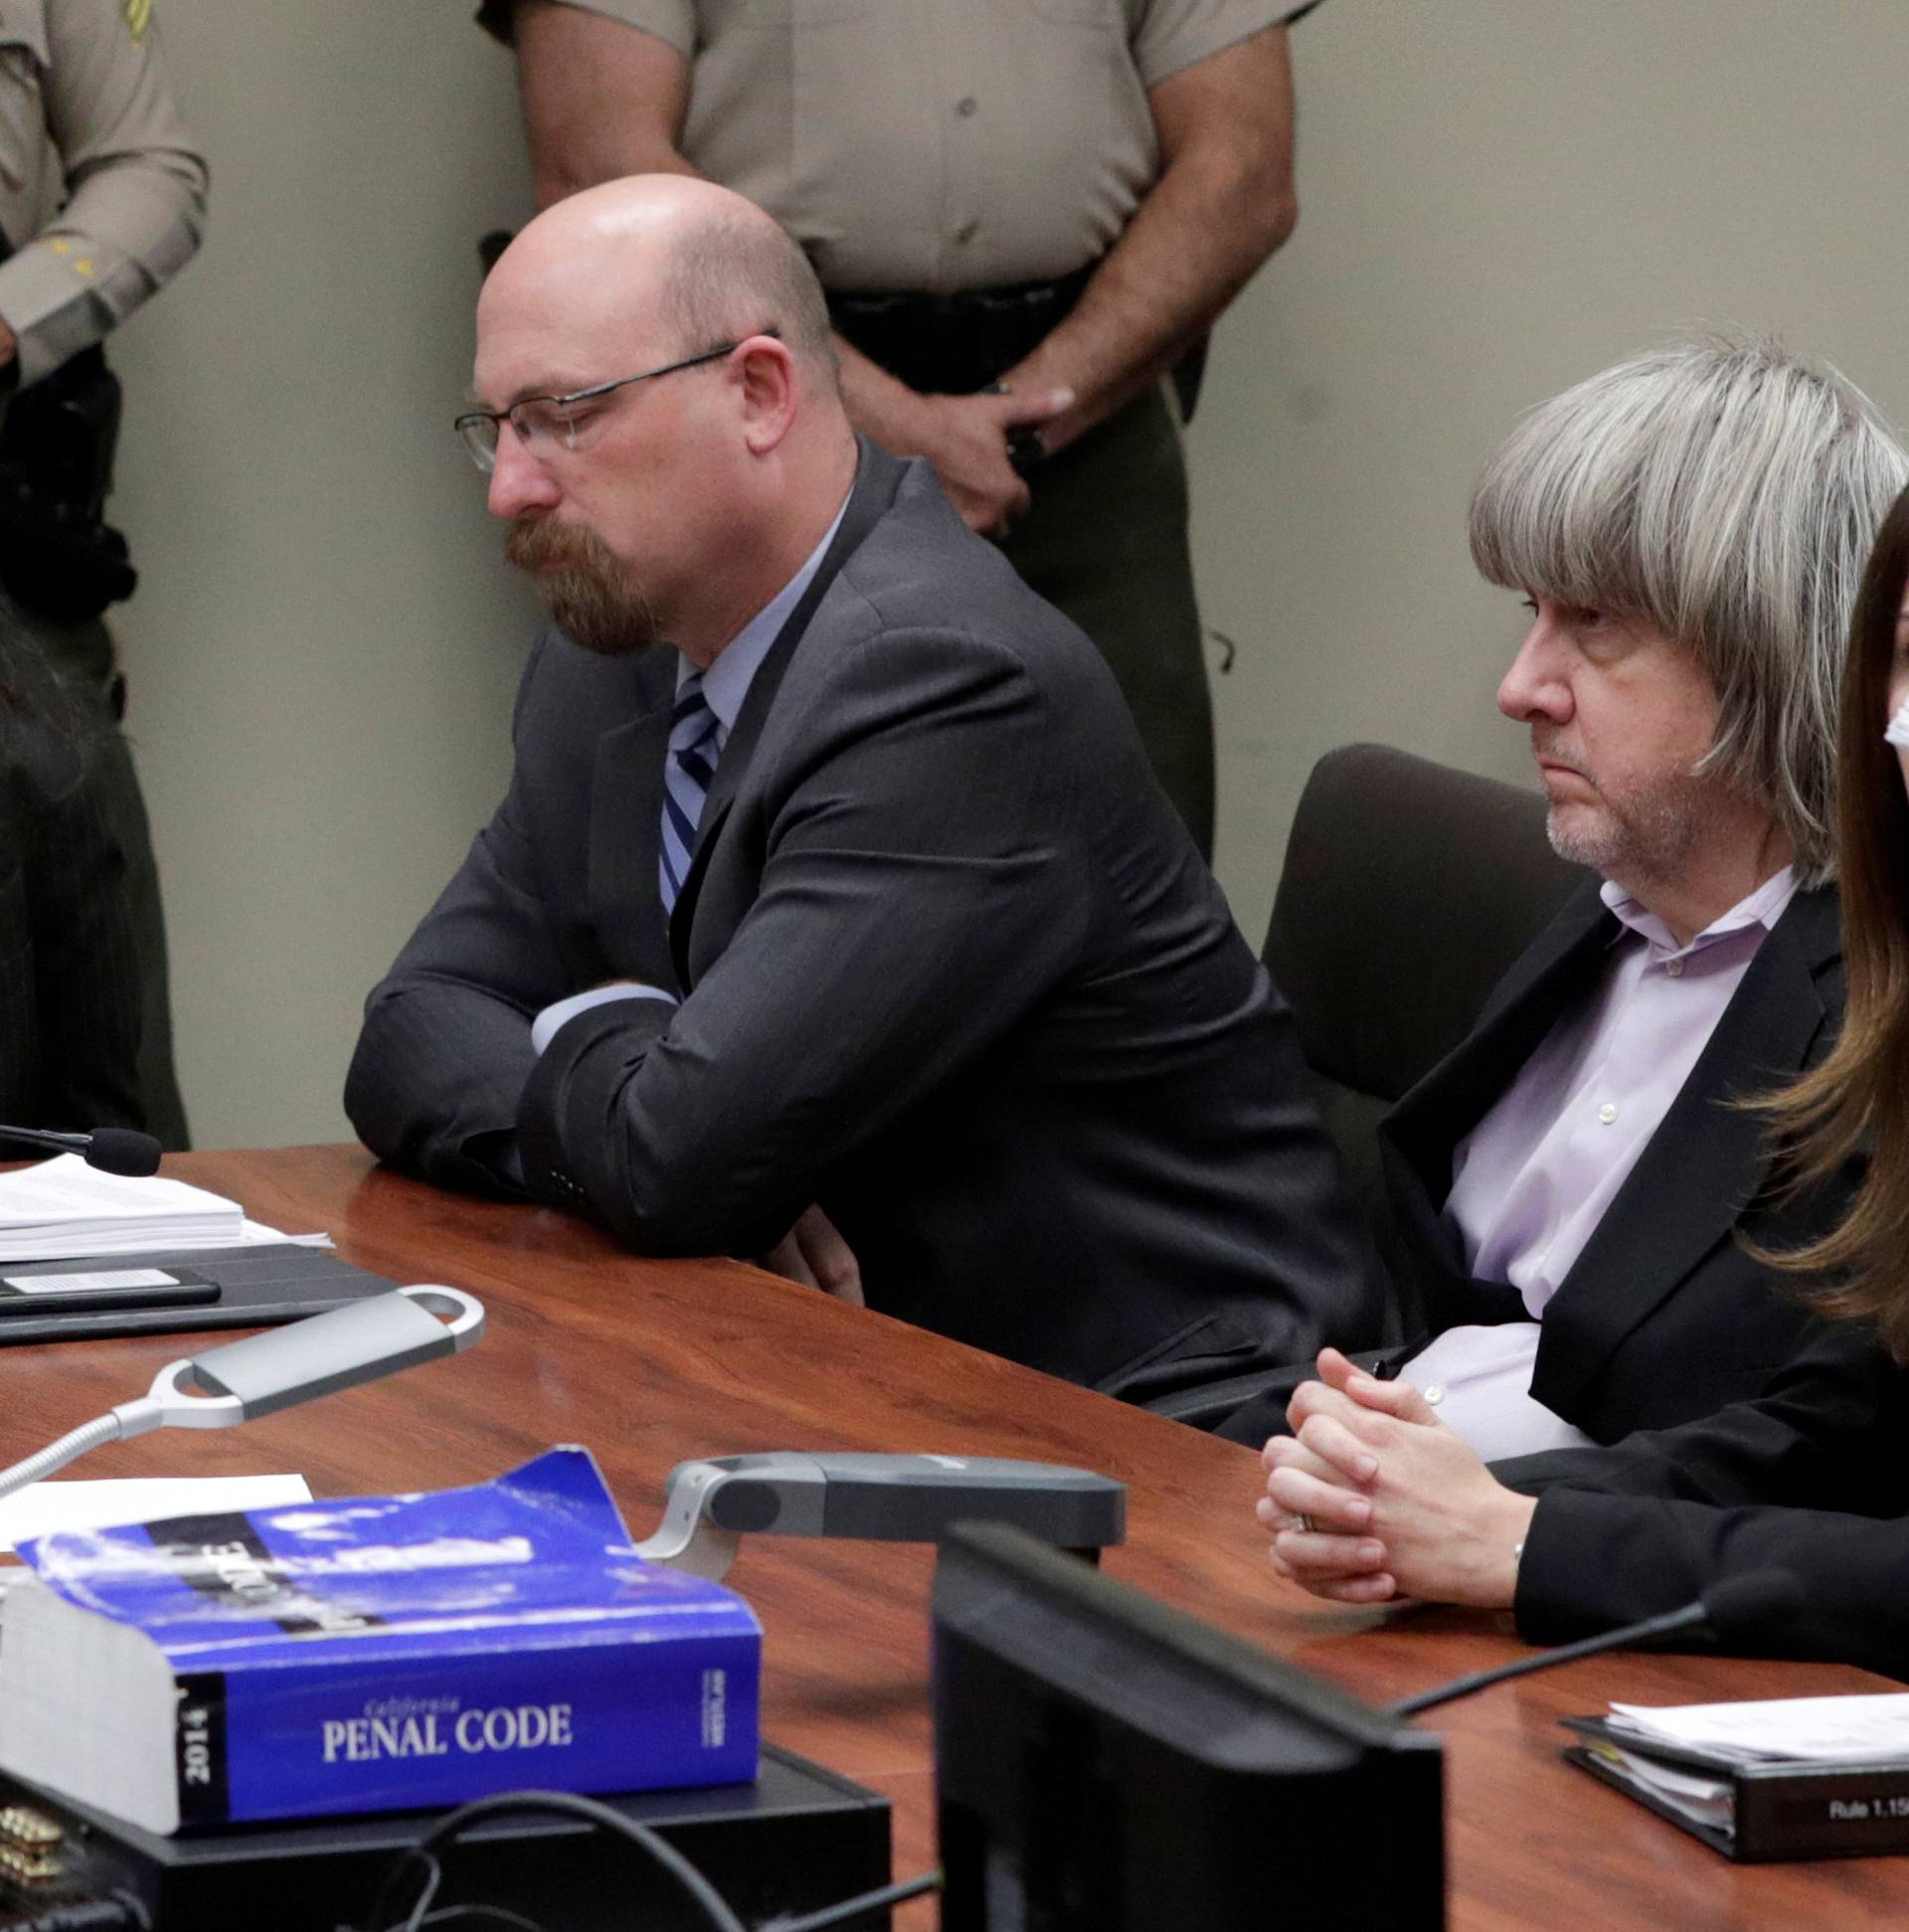 FILE PHOTO: David Turpin and Louise Turpin appear in court for their arraignment in Riverside